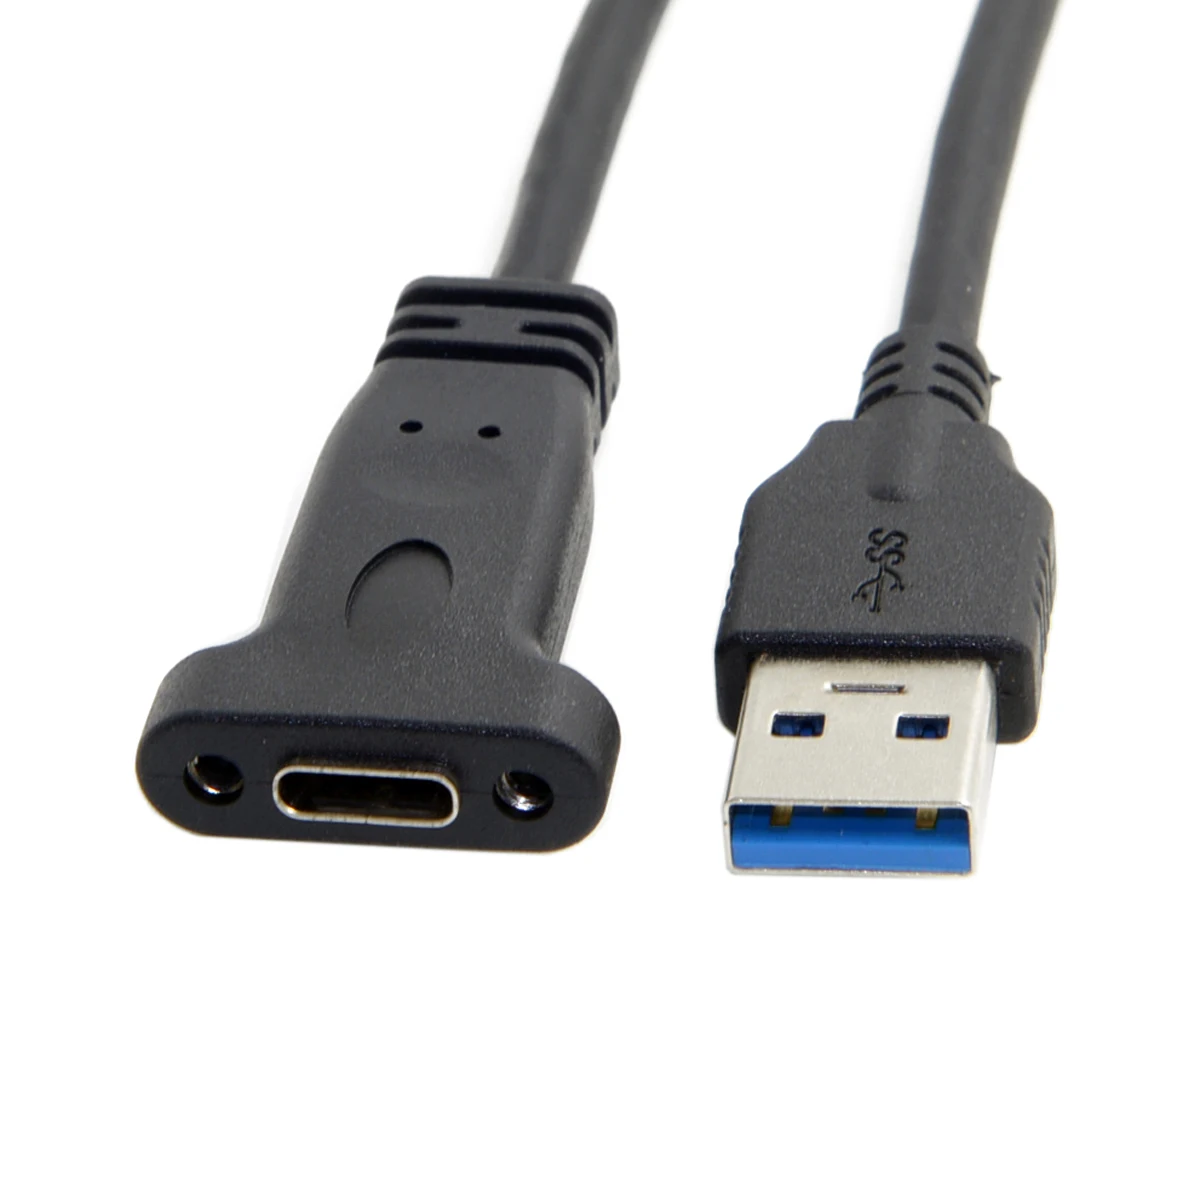 

CY 20cm USB 3.1 Type C USB-C Female to USB 3.0 A Male Data Cable with Panel Mount Screw Hole